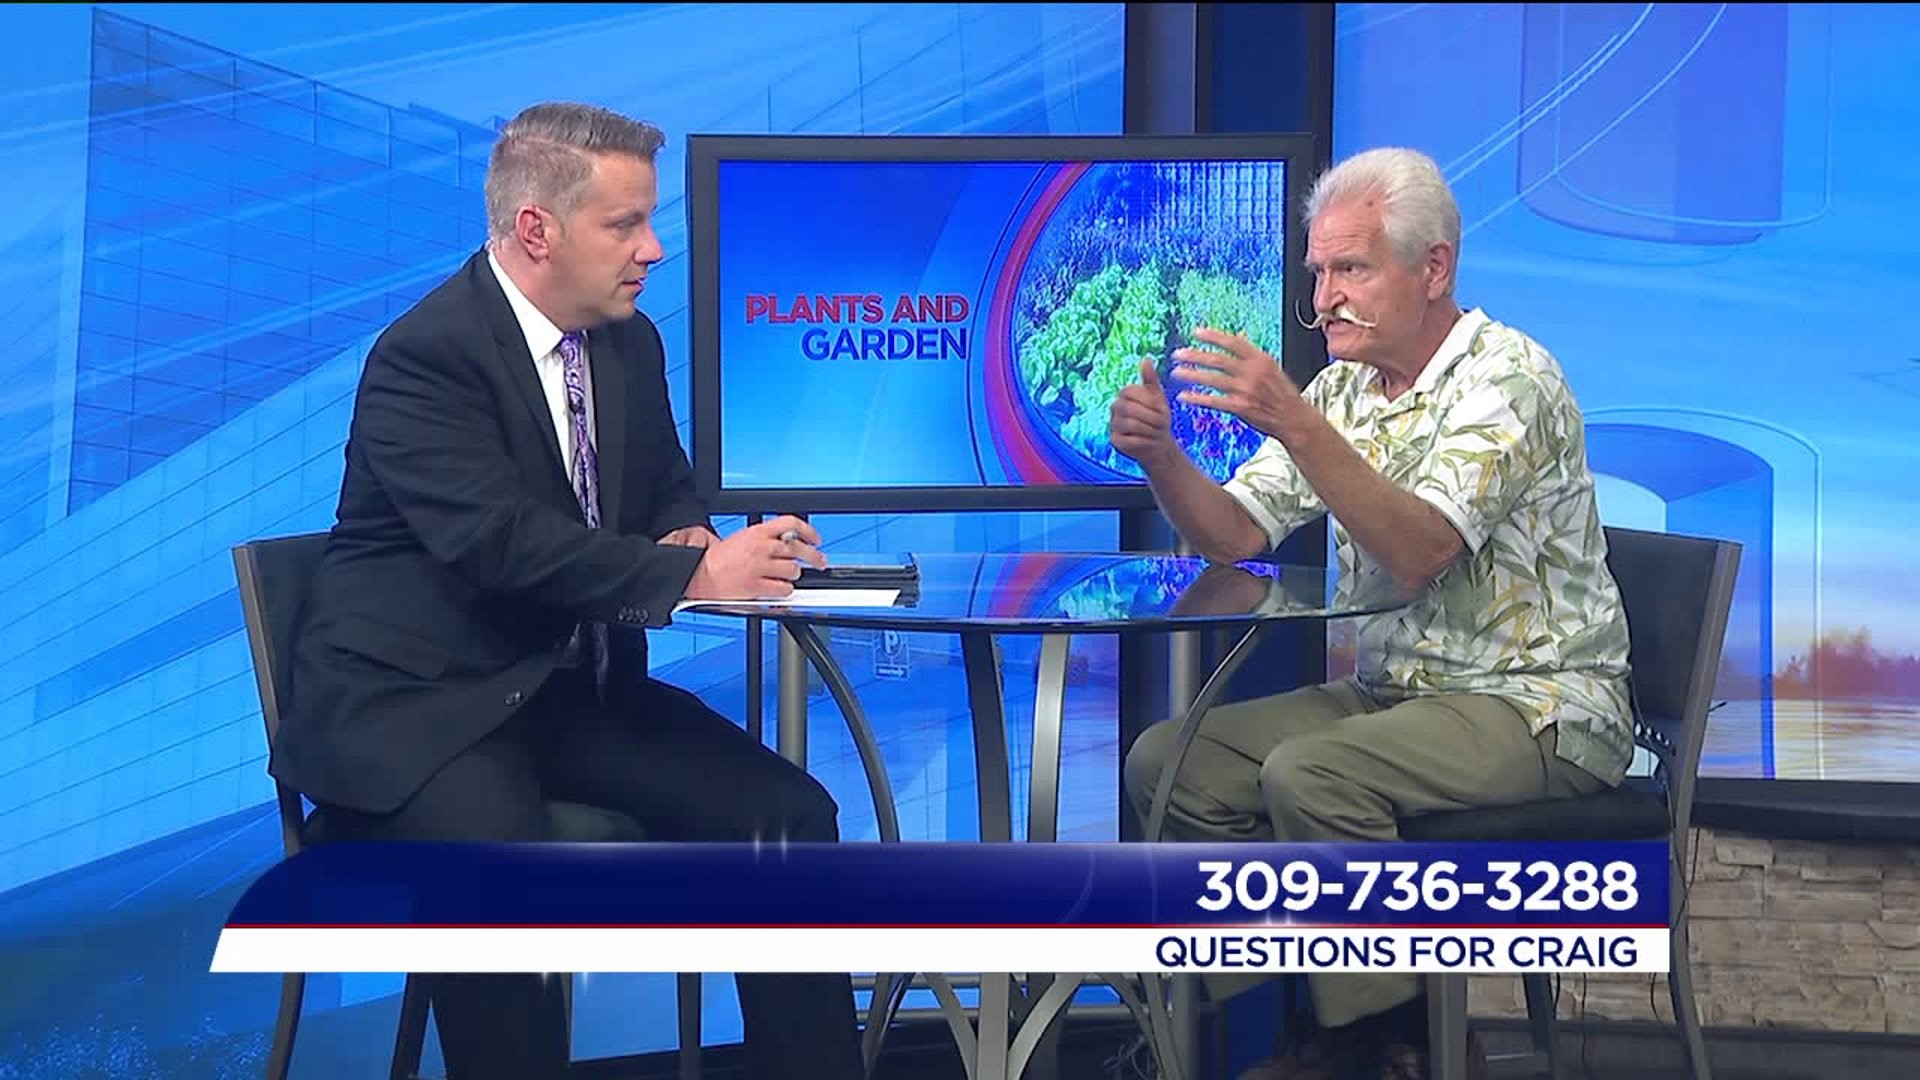 FULL INTERVIEW: Plants & Gardens with Craig Hignight on Sept. 13th